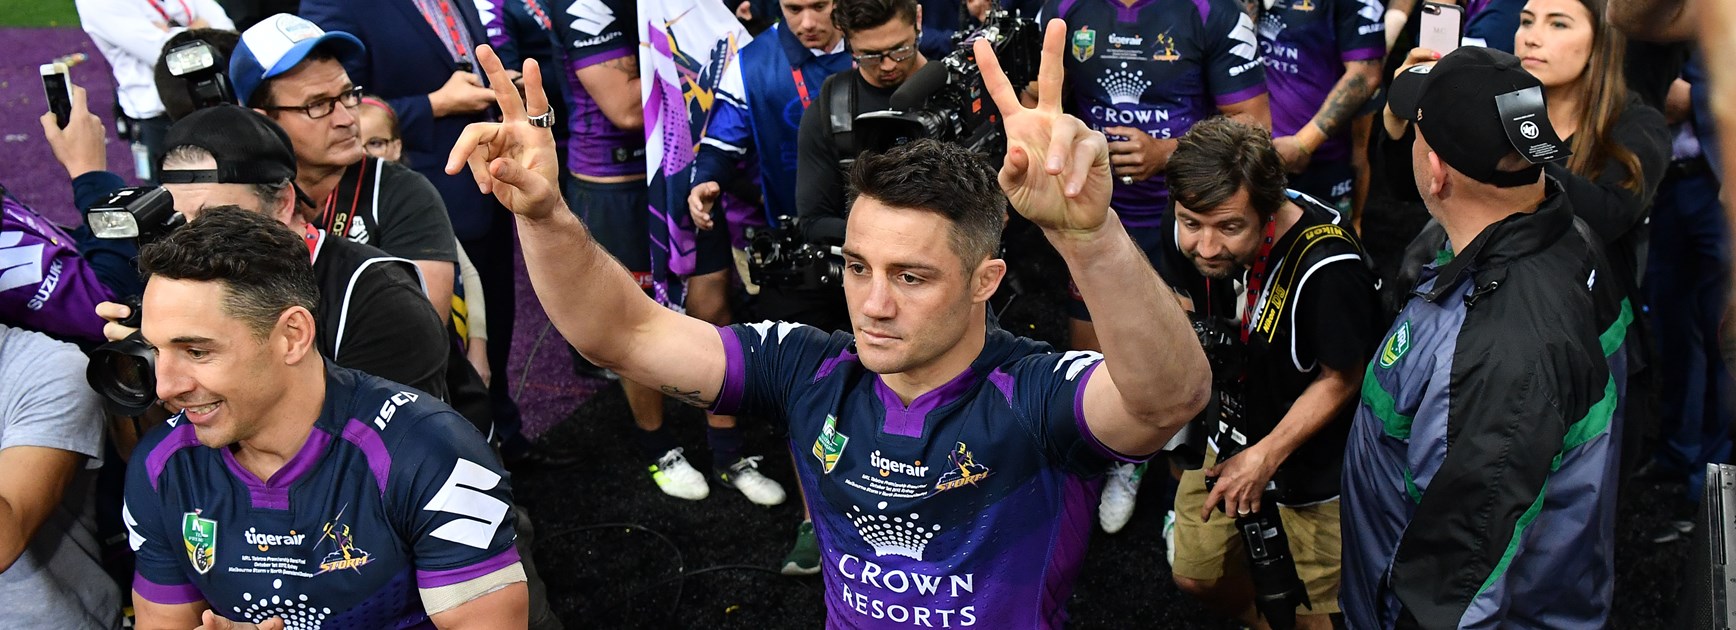 Life without Cronk no issue for Storm